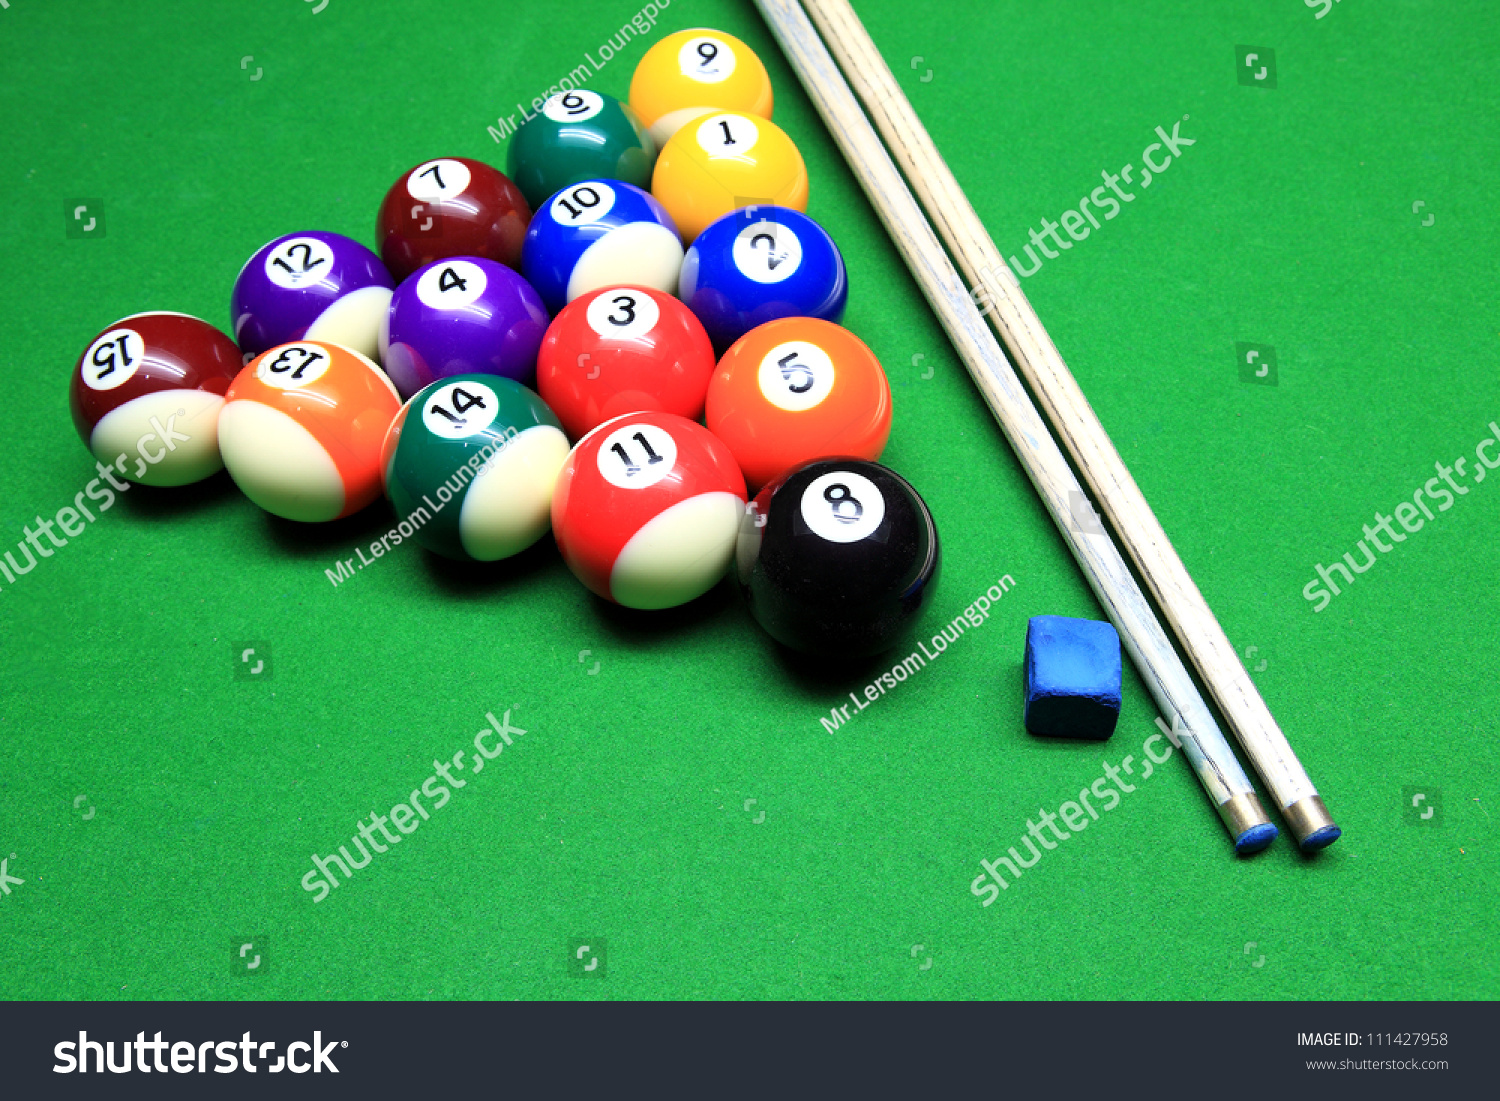 stock-photo-pool-game-on-green-table-111